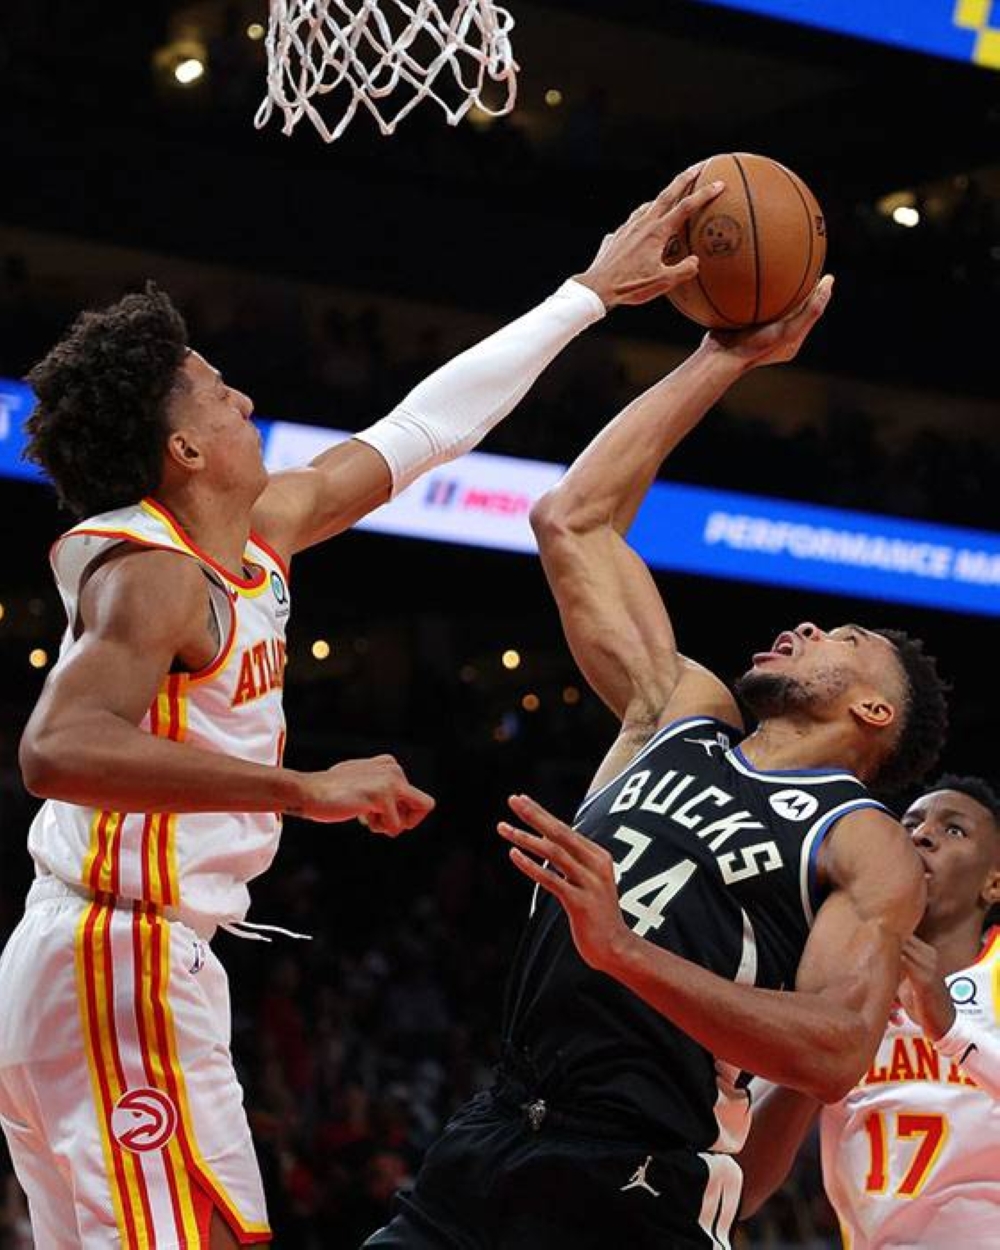 Hawks romp to 110-88 win without Young, Giannis goes down